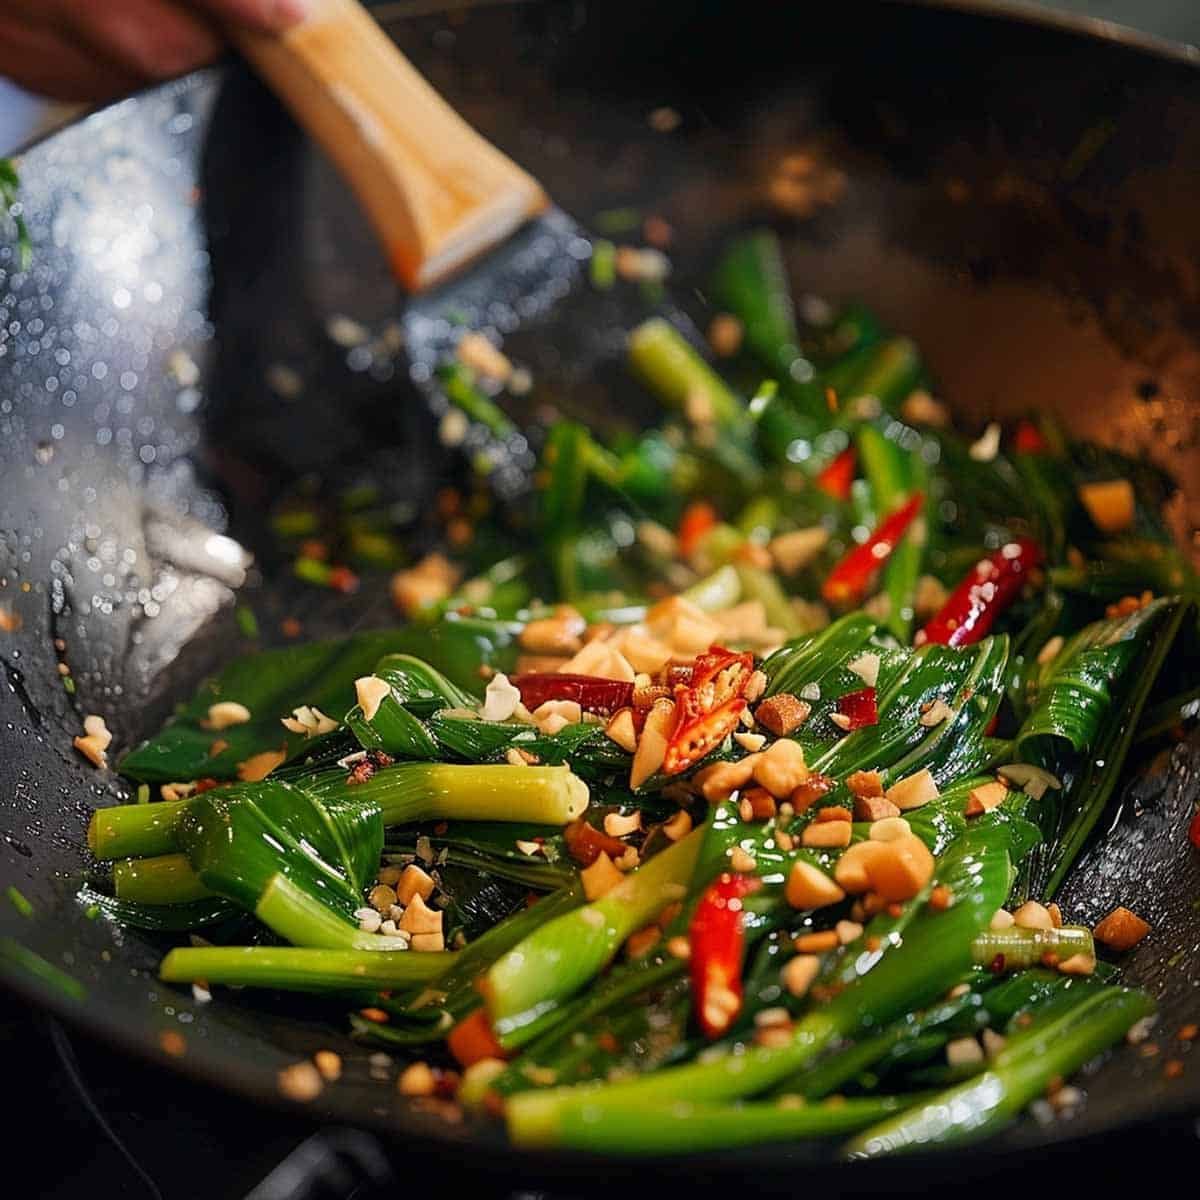 Tossing fresh morning glory in a wok to coat the leaves and stems with garlic and chili-infused oil